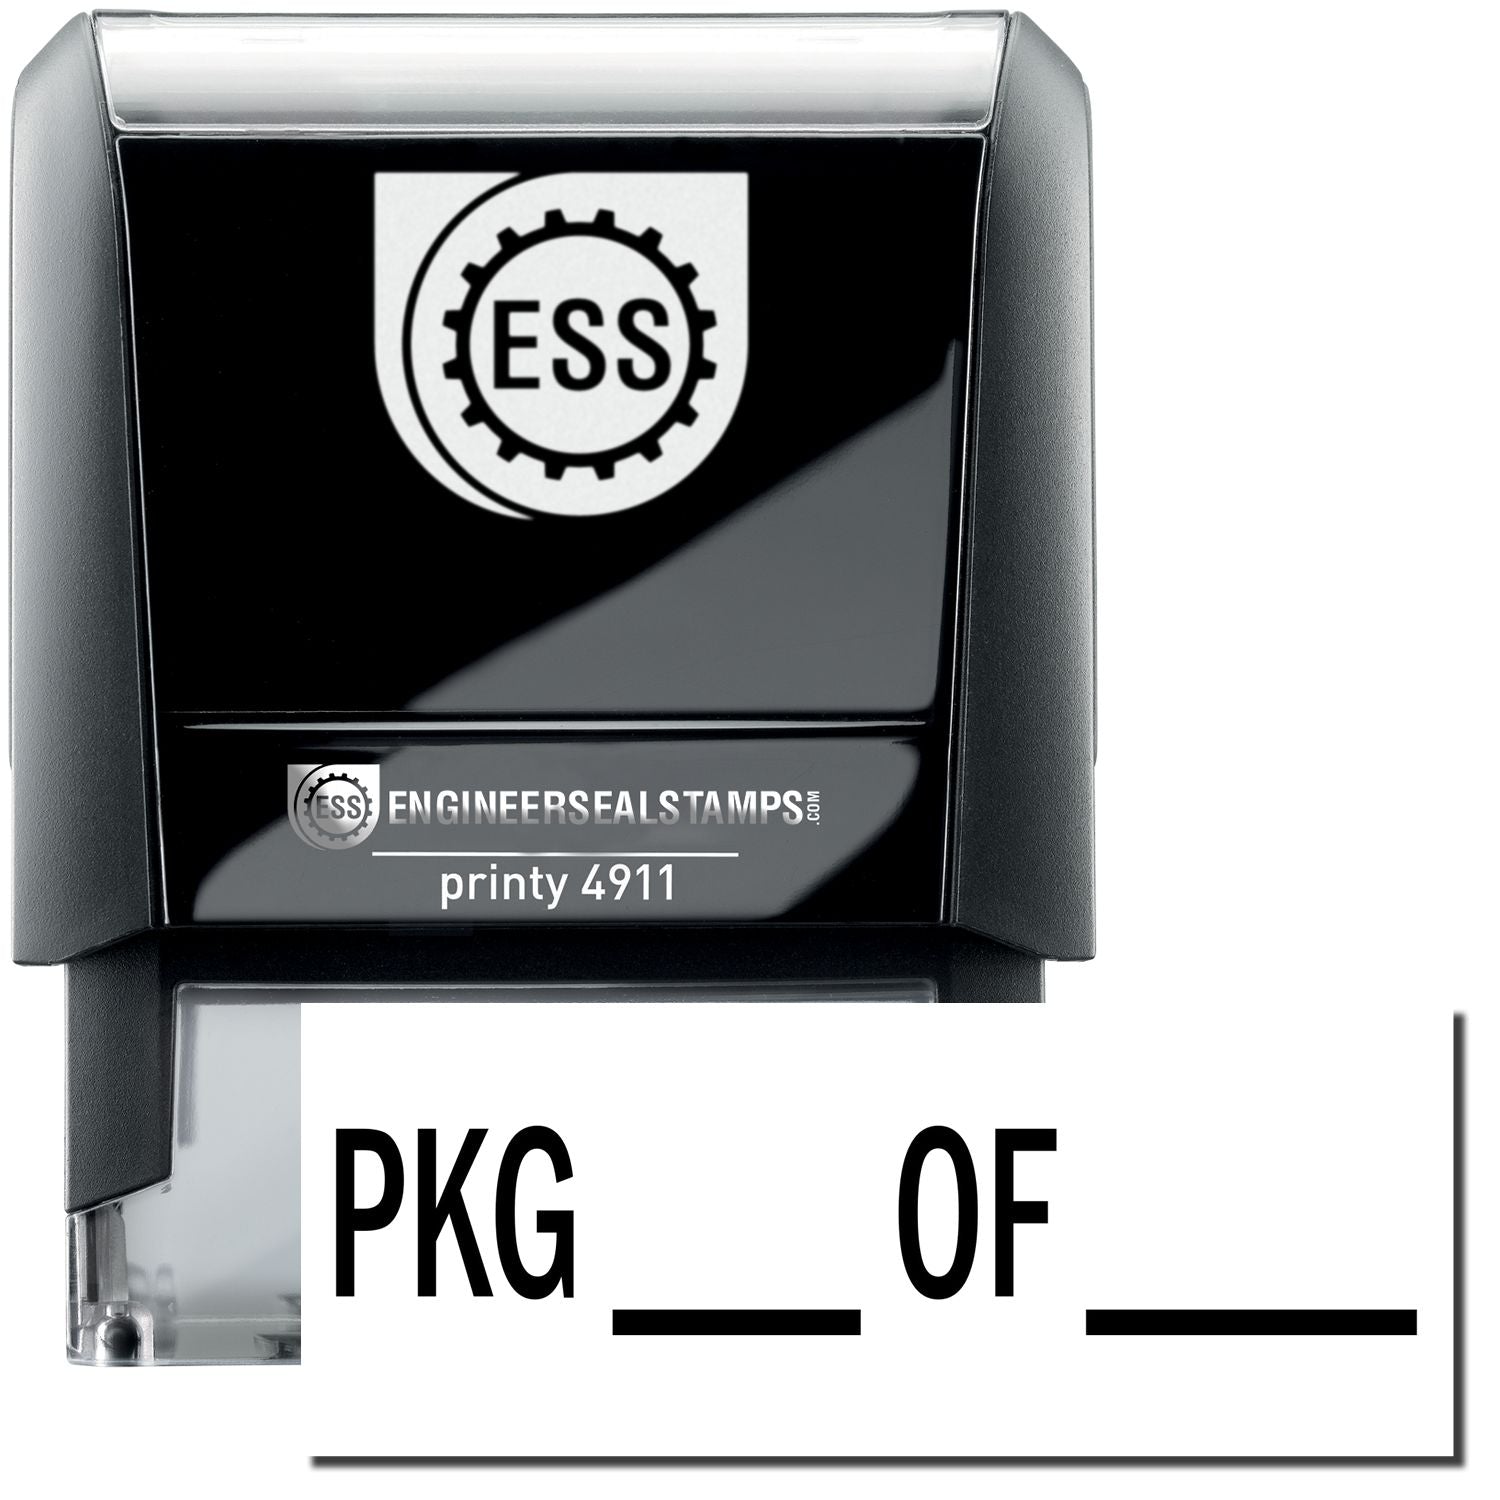 A self-inking stamp with a stamped image showing how the text "PKG ___ OF ___" is displayed after stamping.